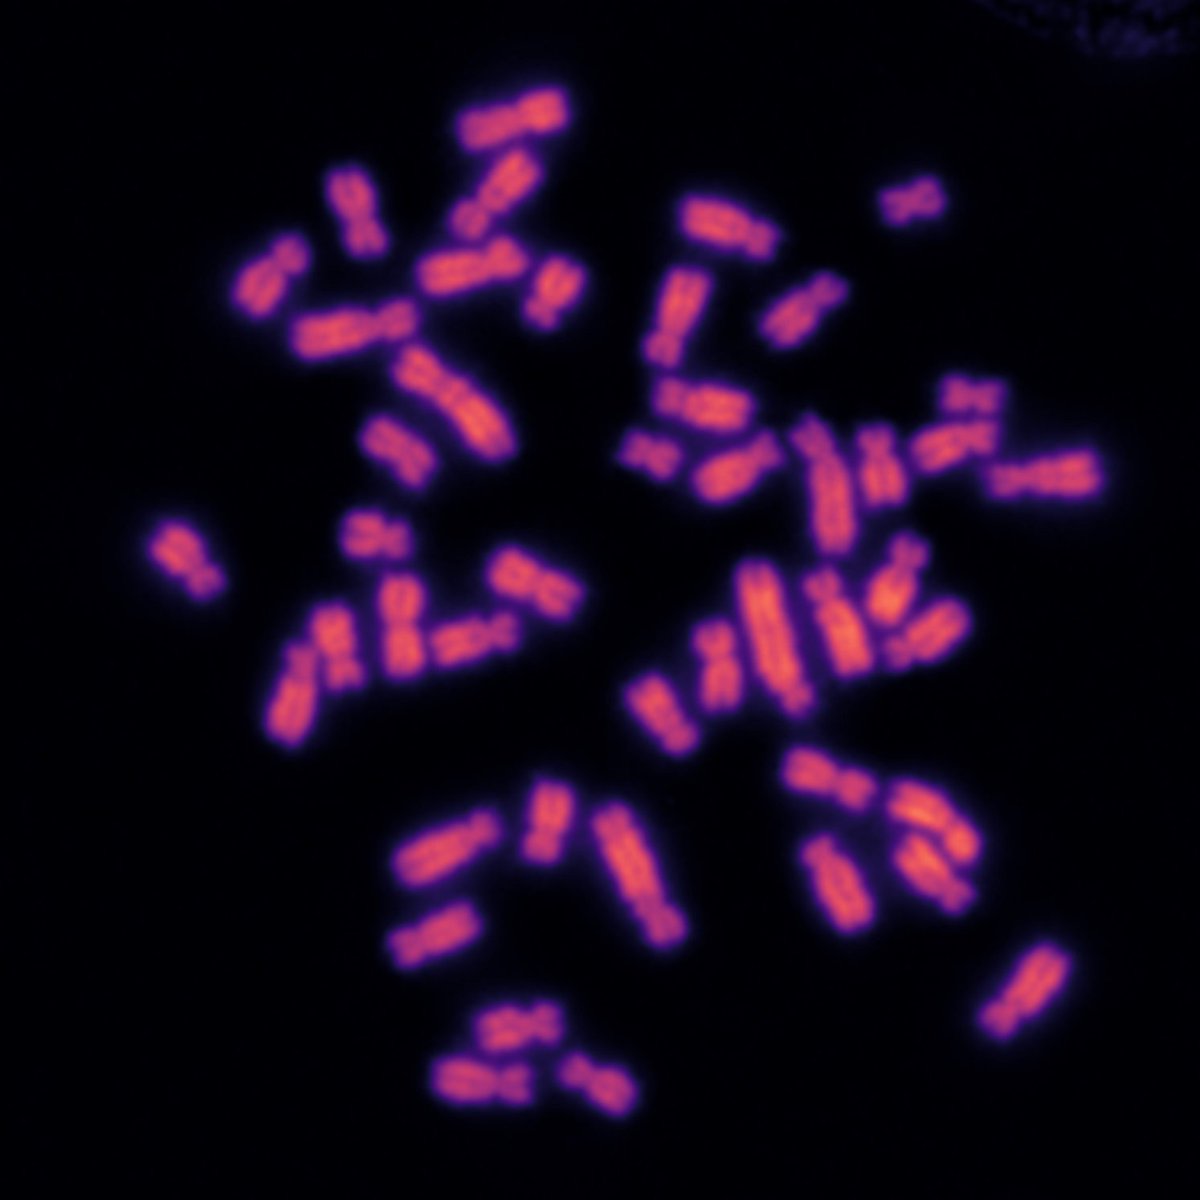 This beautiful #MicroscopyMonday shows a #zebrafish karyotype, the complete set of chromosomes in its cells. @DiezMichay (@GertonJennifer lab)